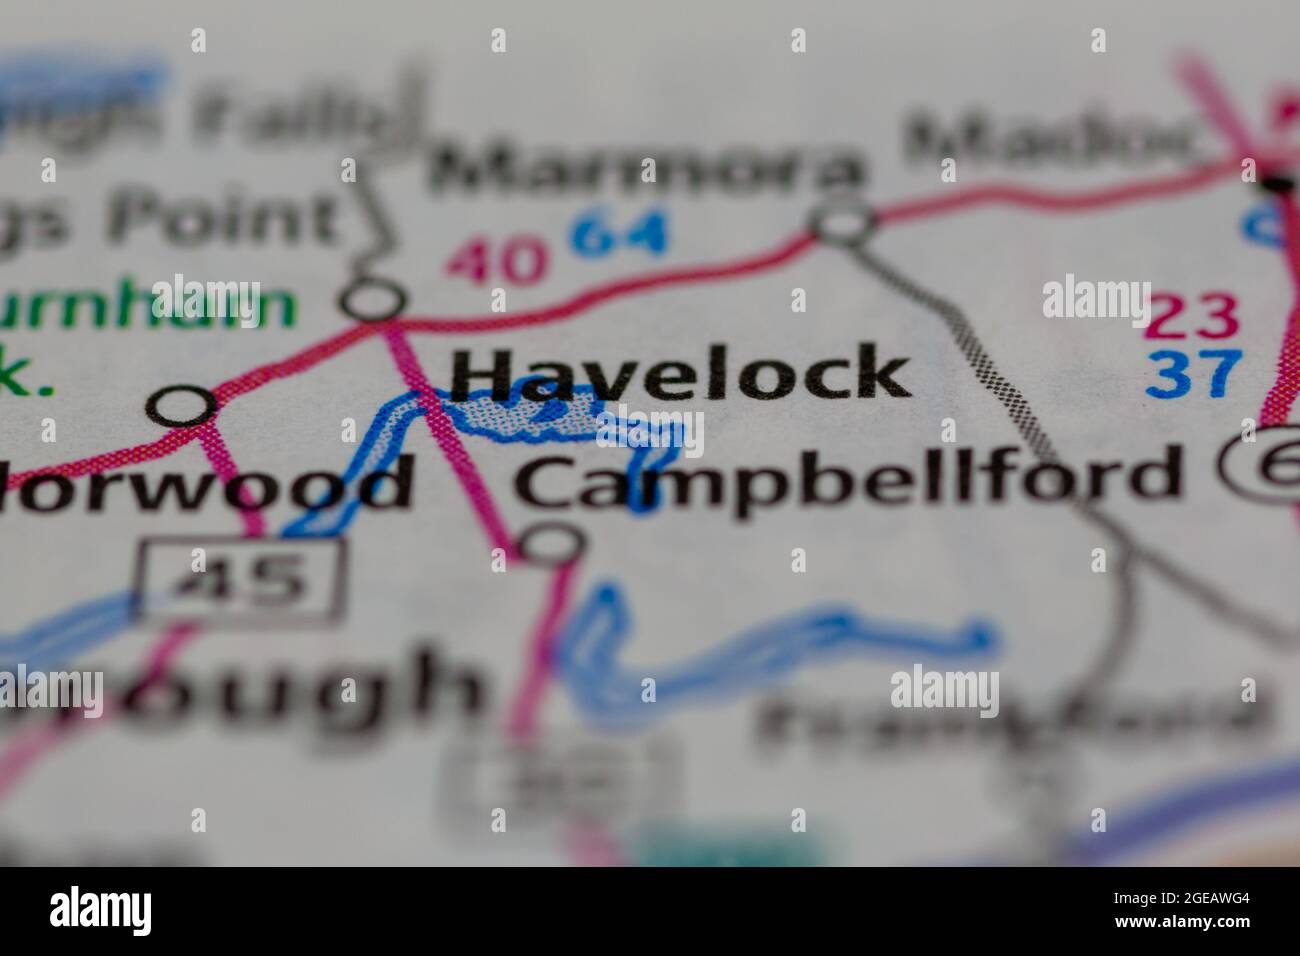 Havelock Ontario Canada Shown On A Road Map Or Geography Map 2GEAWG4 